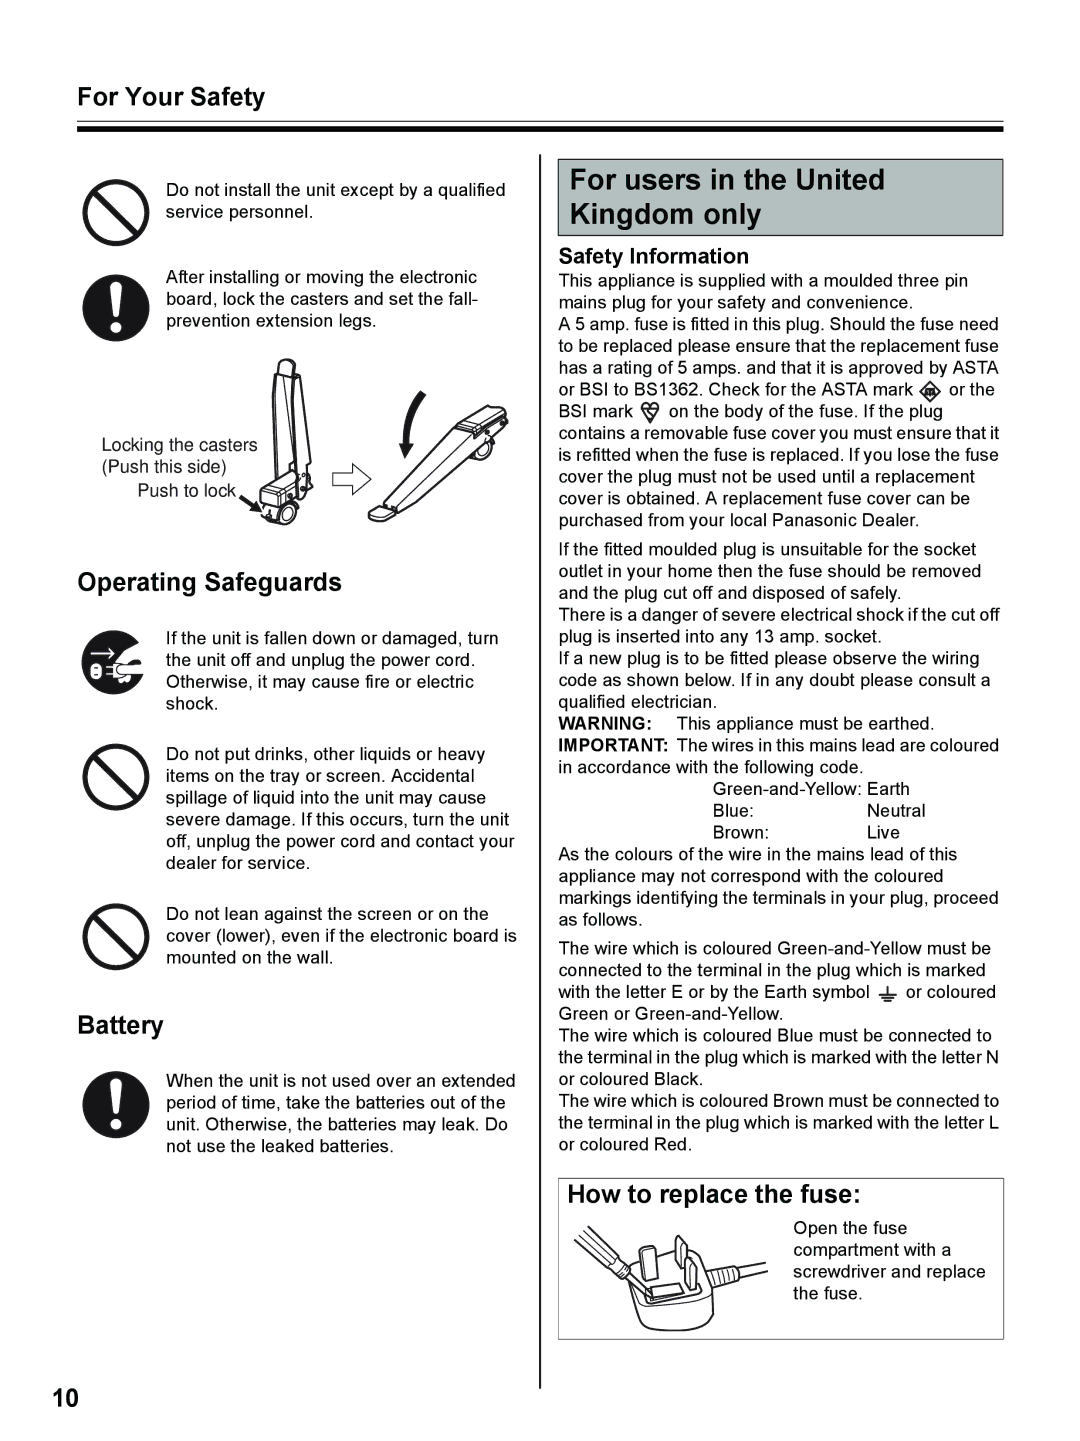 Panasonic UB-8325 operating instructions For users in the United Kingdom only, How to replace the fuse, Safety Information 